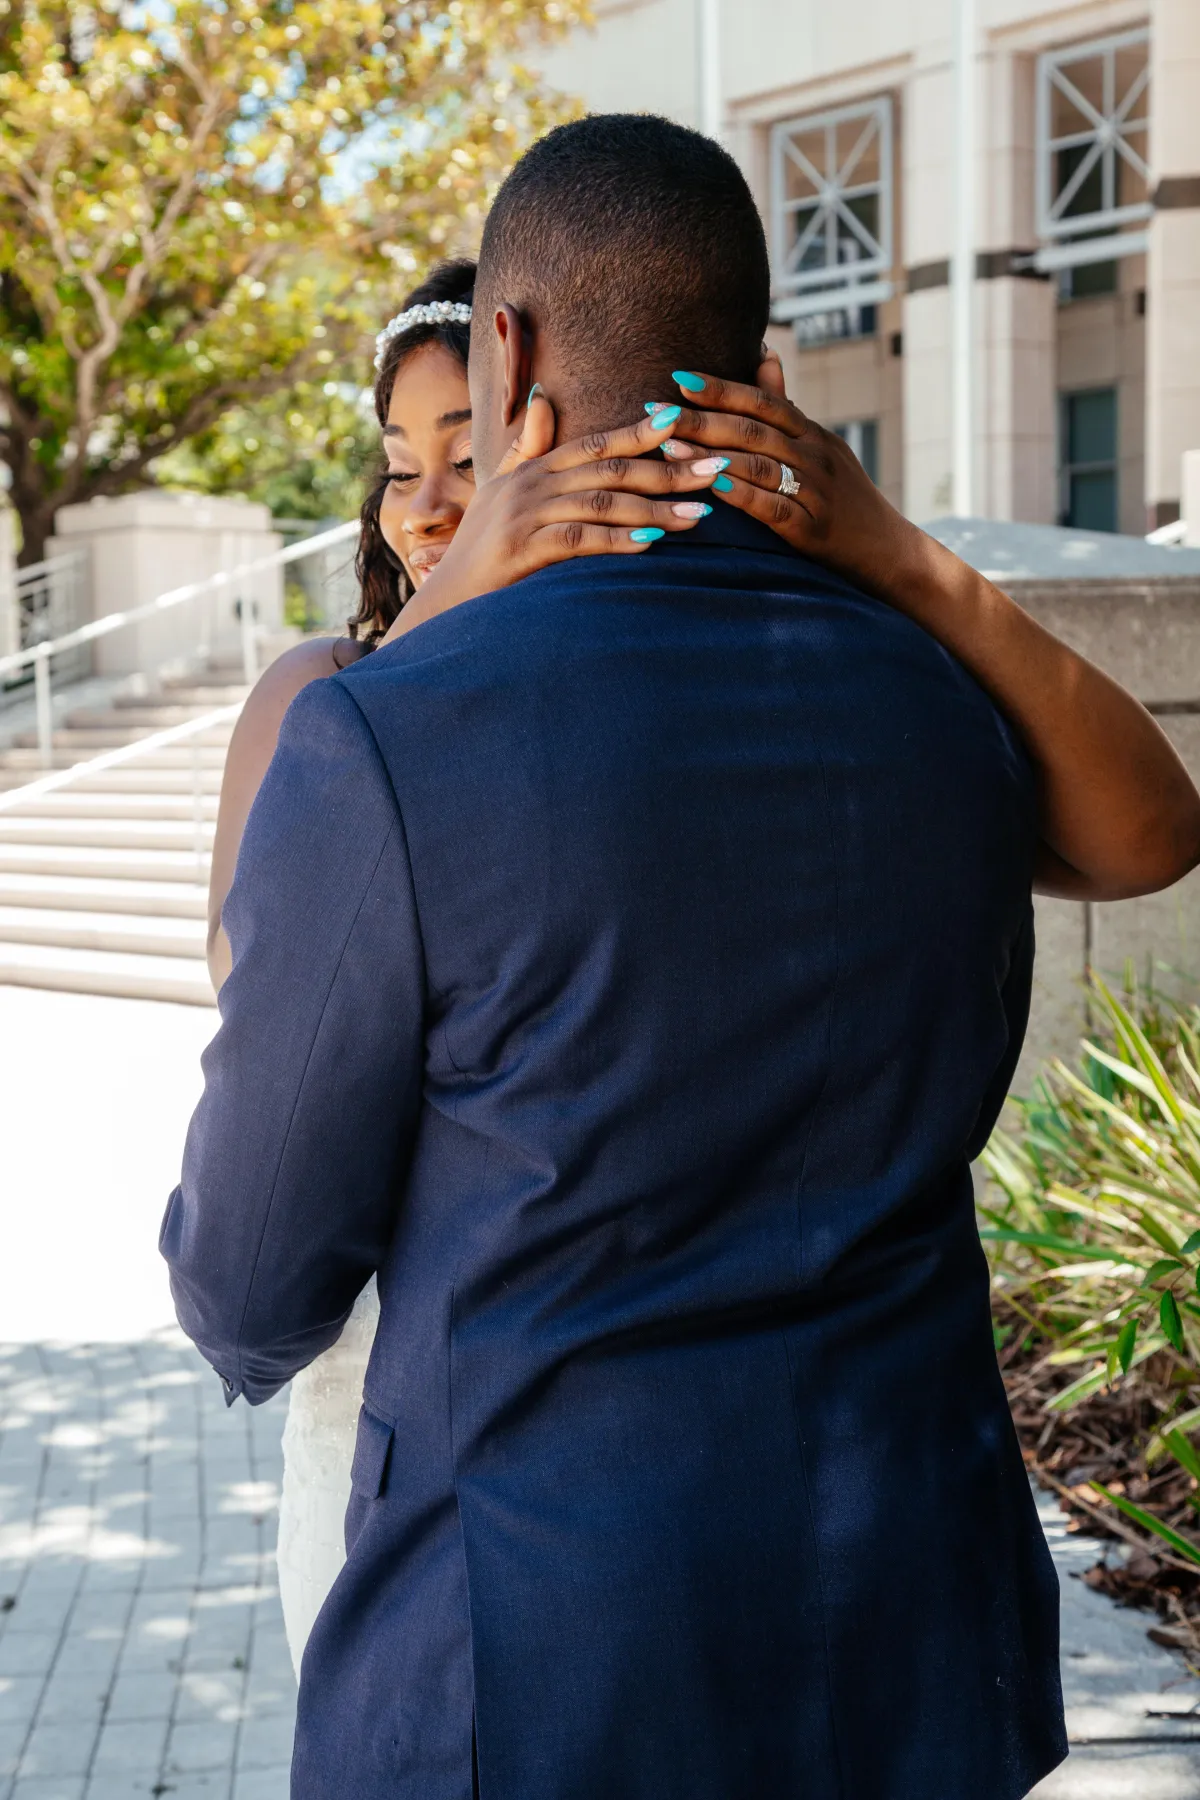 Bride and groom sharing a warm, intimate hug during their posed wedding photoshoot